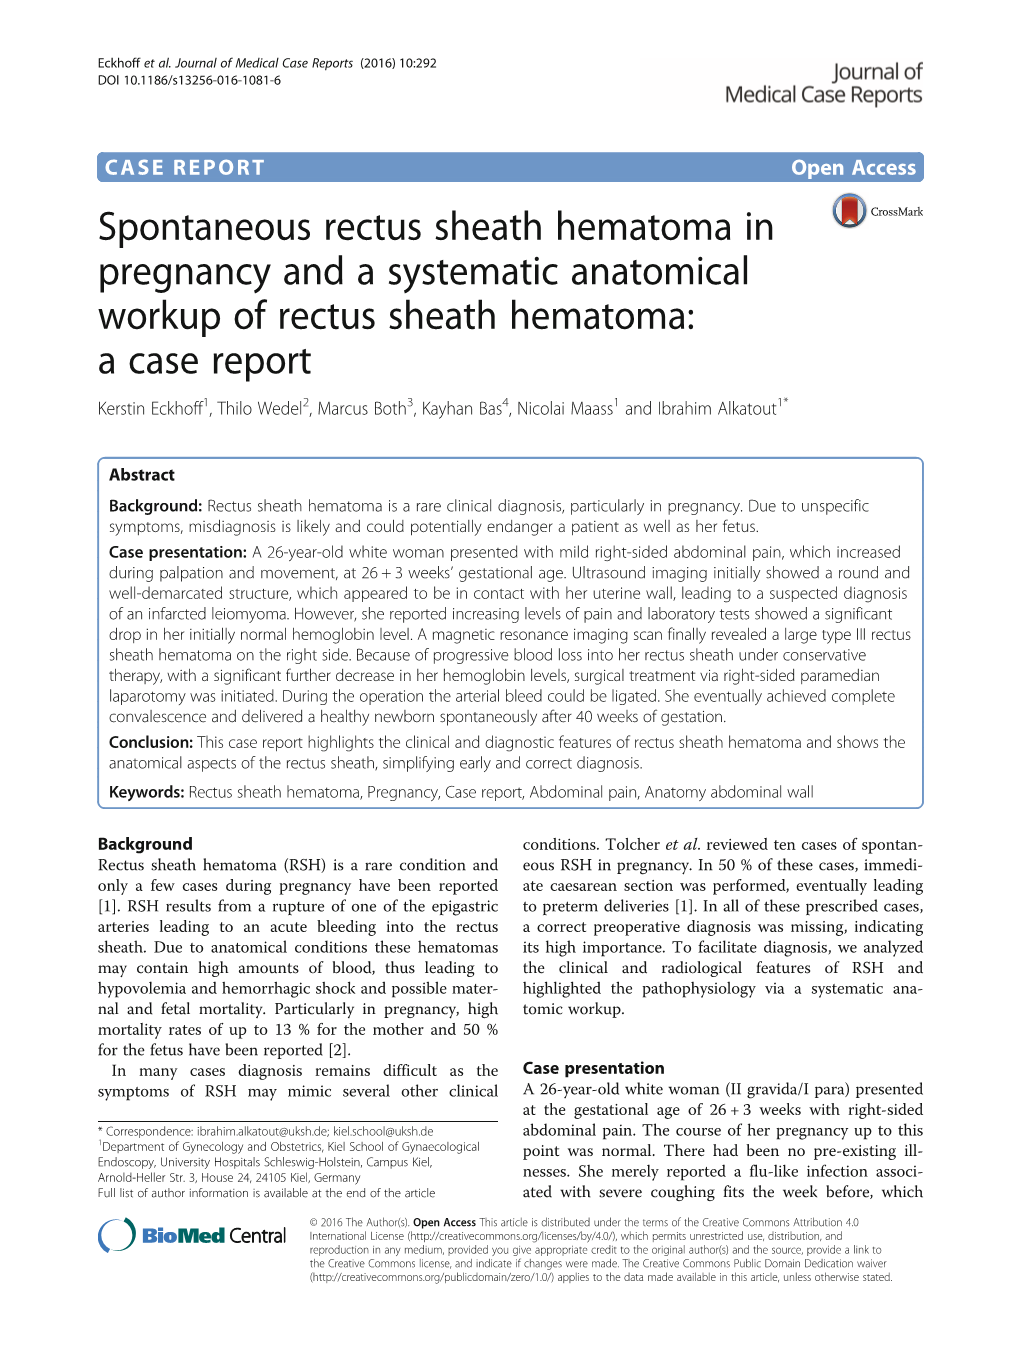 Spontaneous Rectus Sheath Hematoma in Pregnancy and A